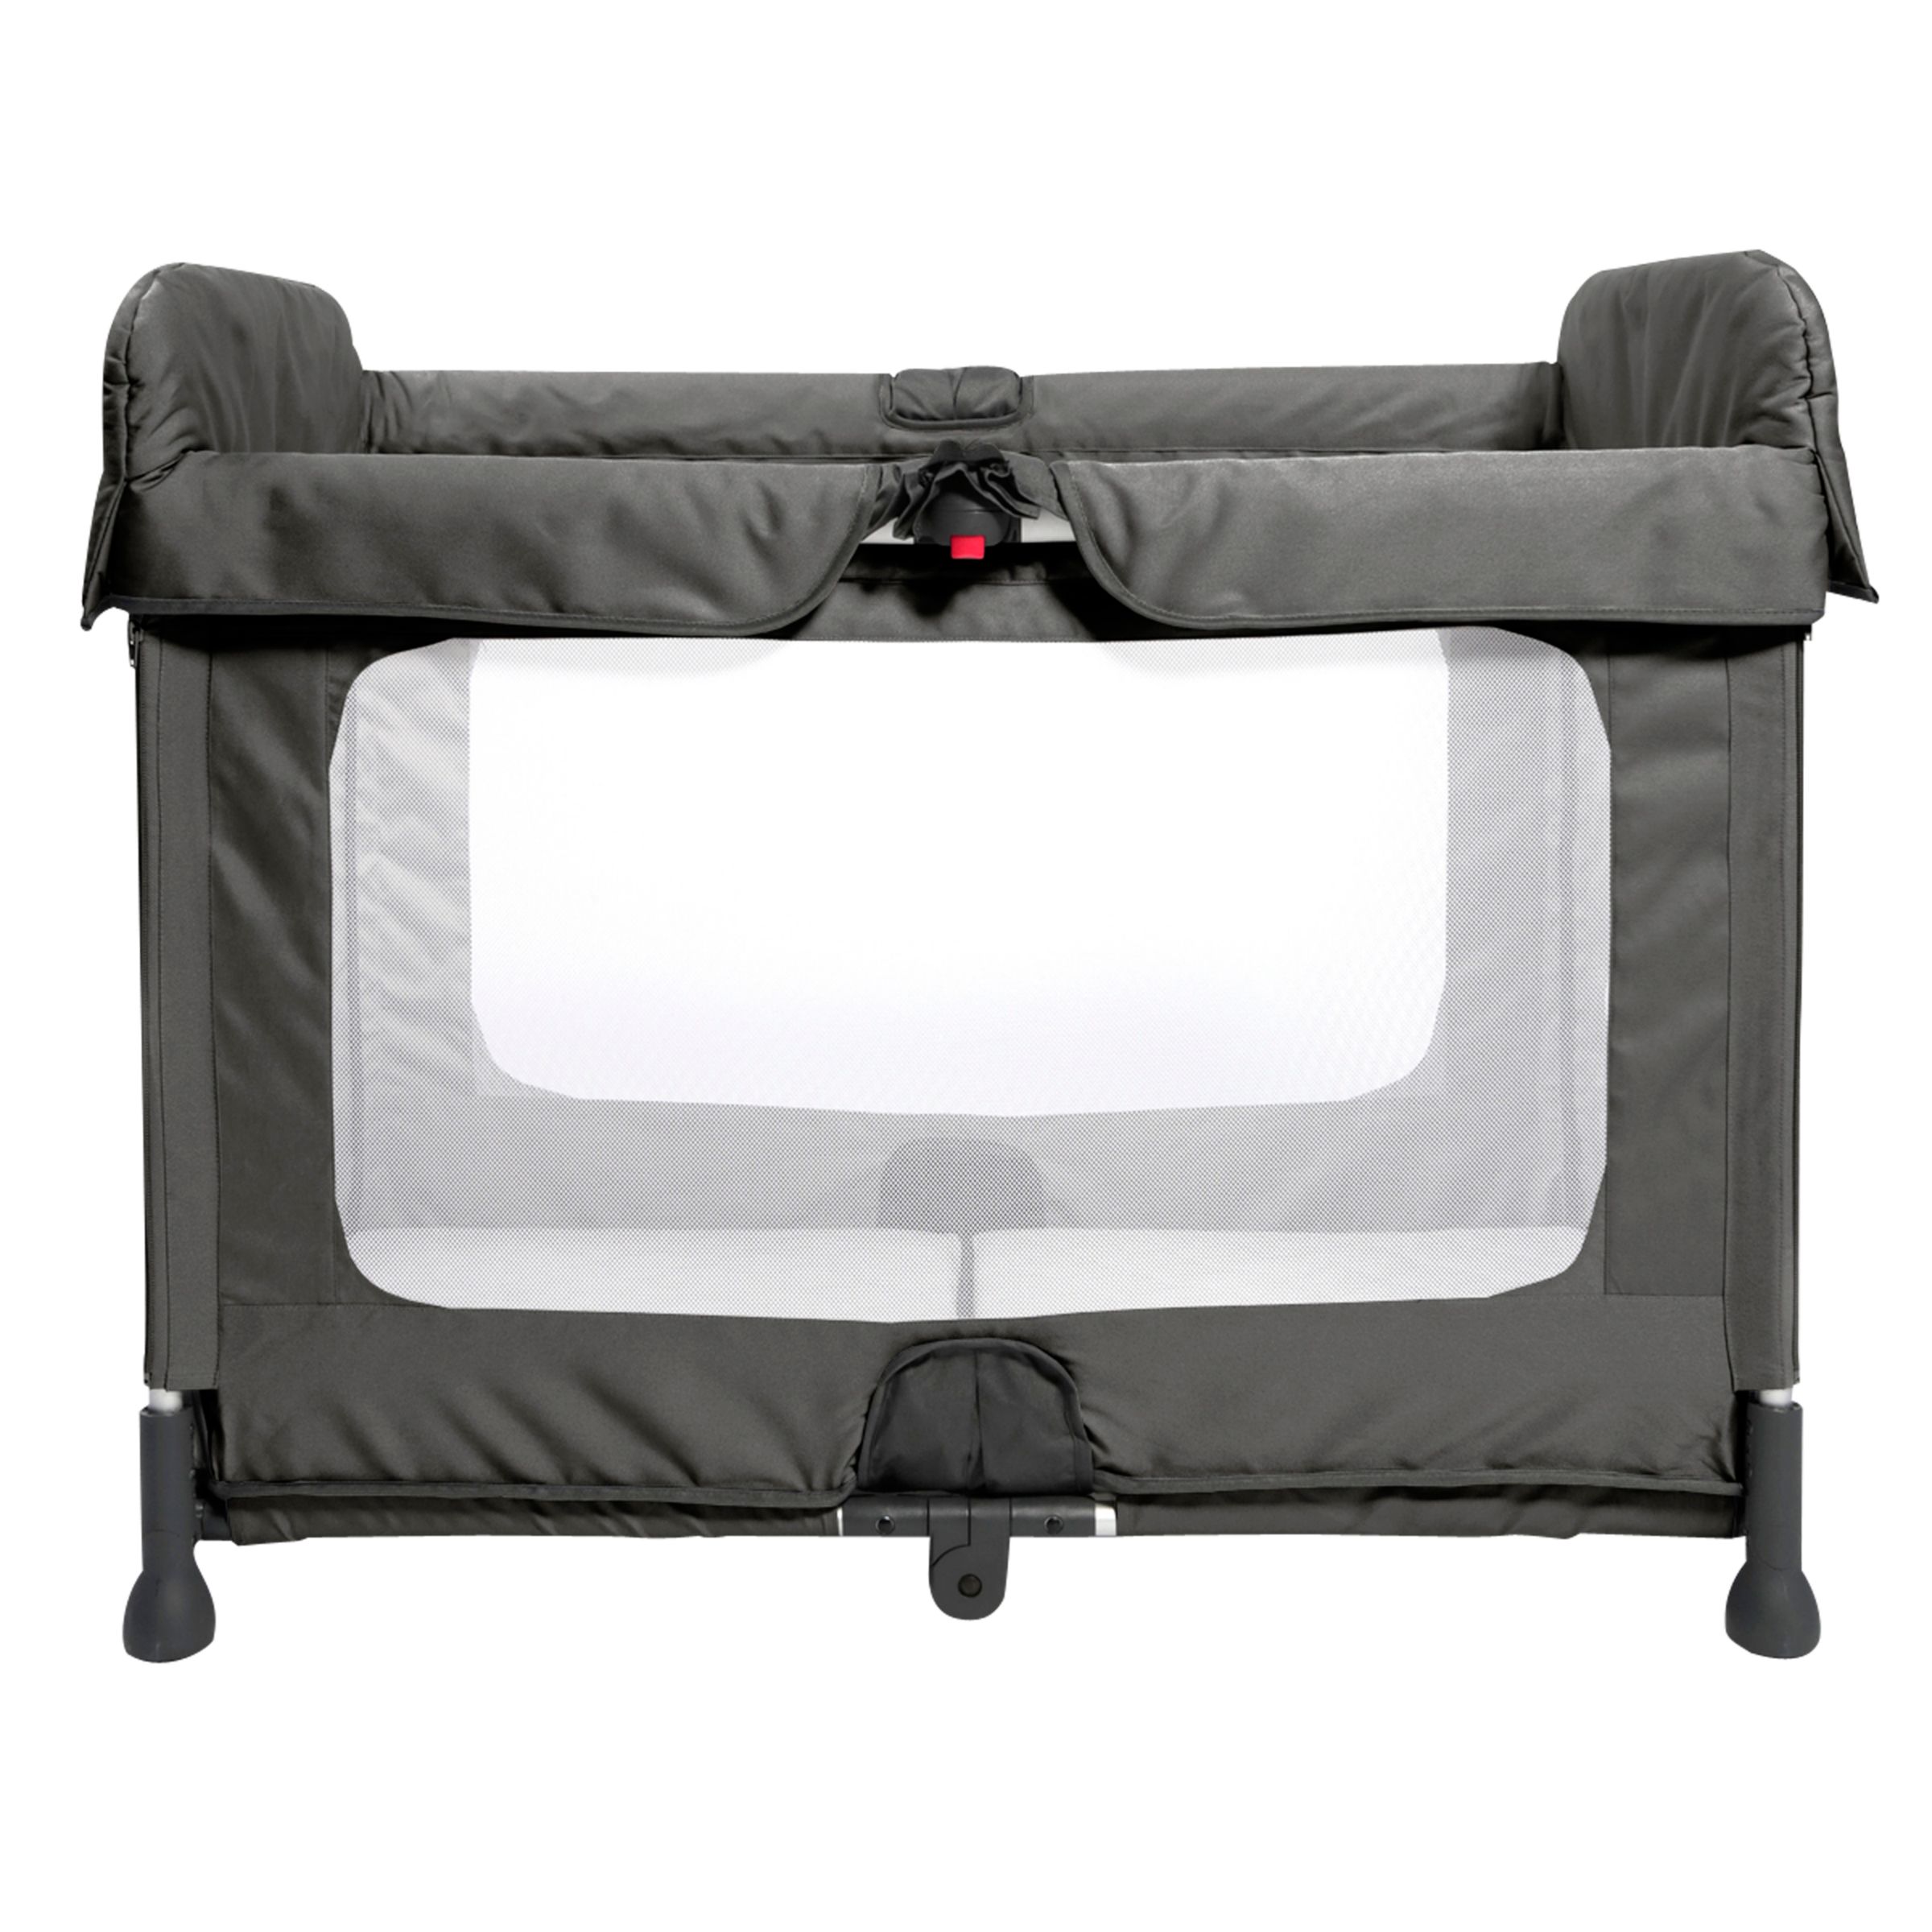 spacecot travel cot mattress size